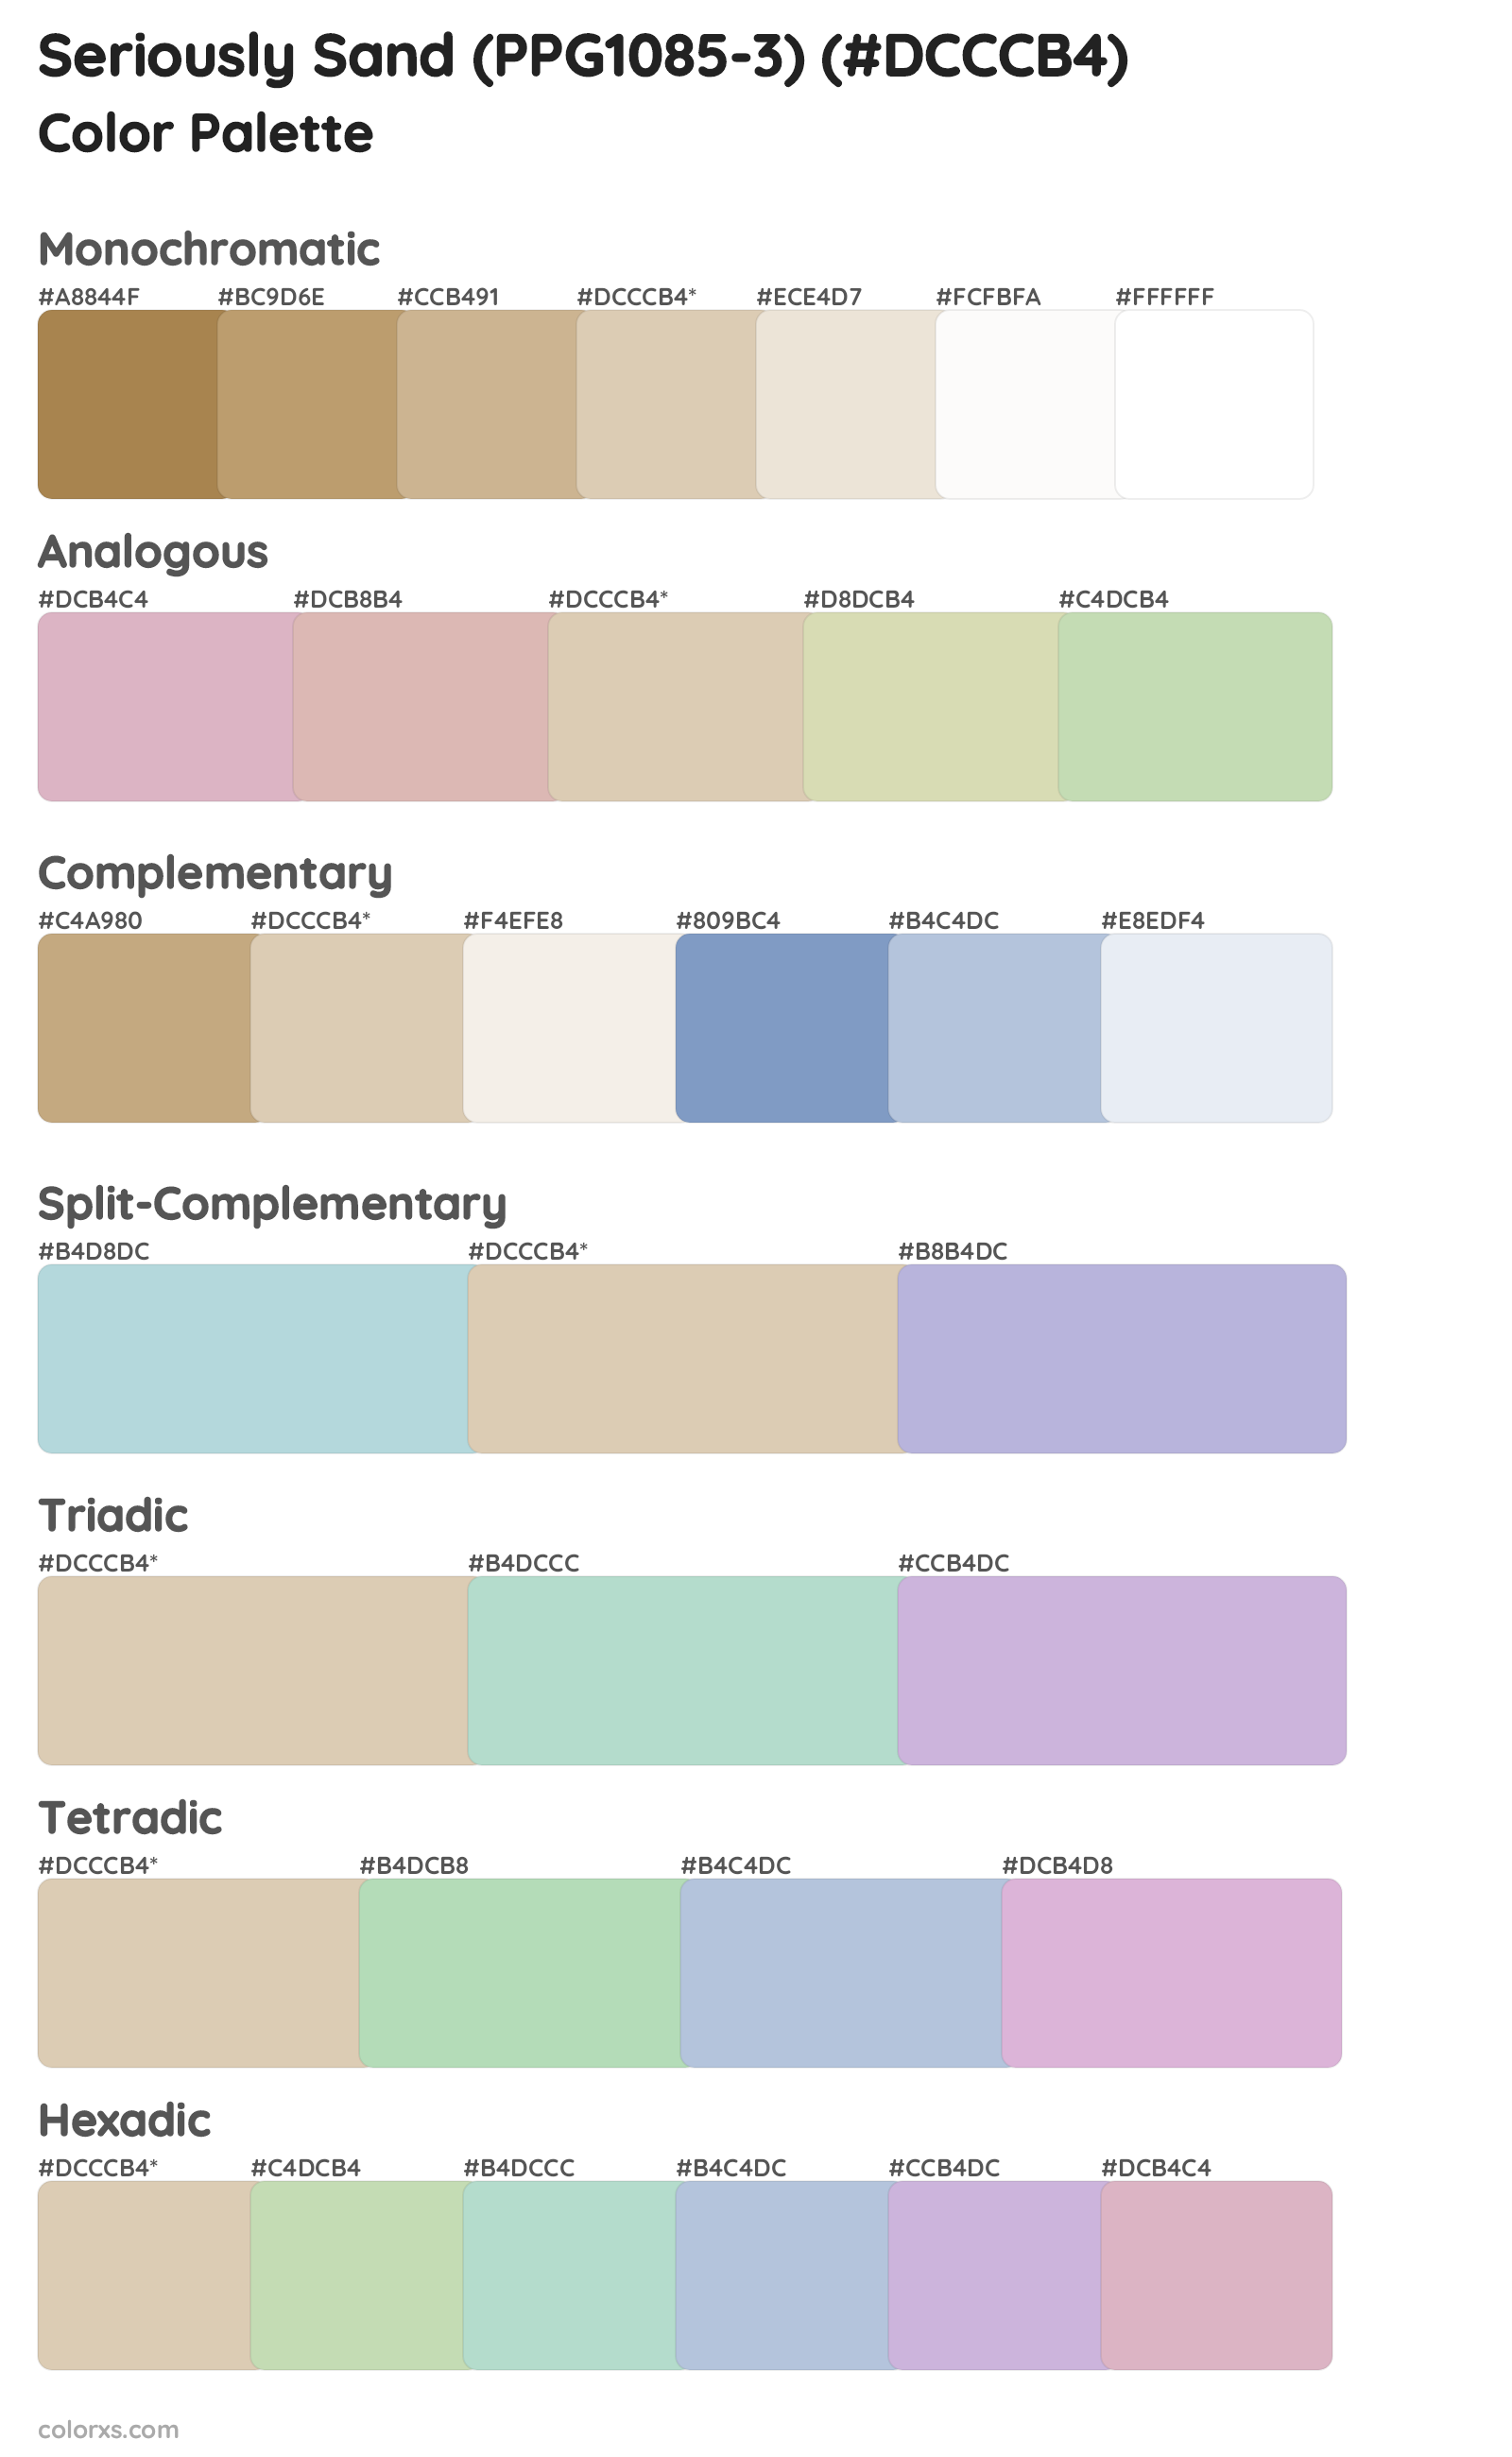 Seriously Sand (PPG1085-3) Color Scheme Palettes